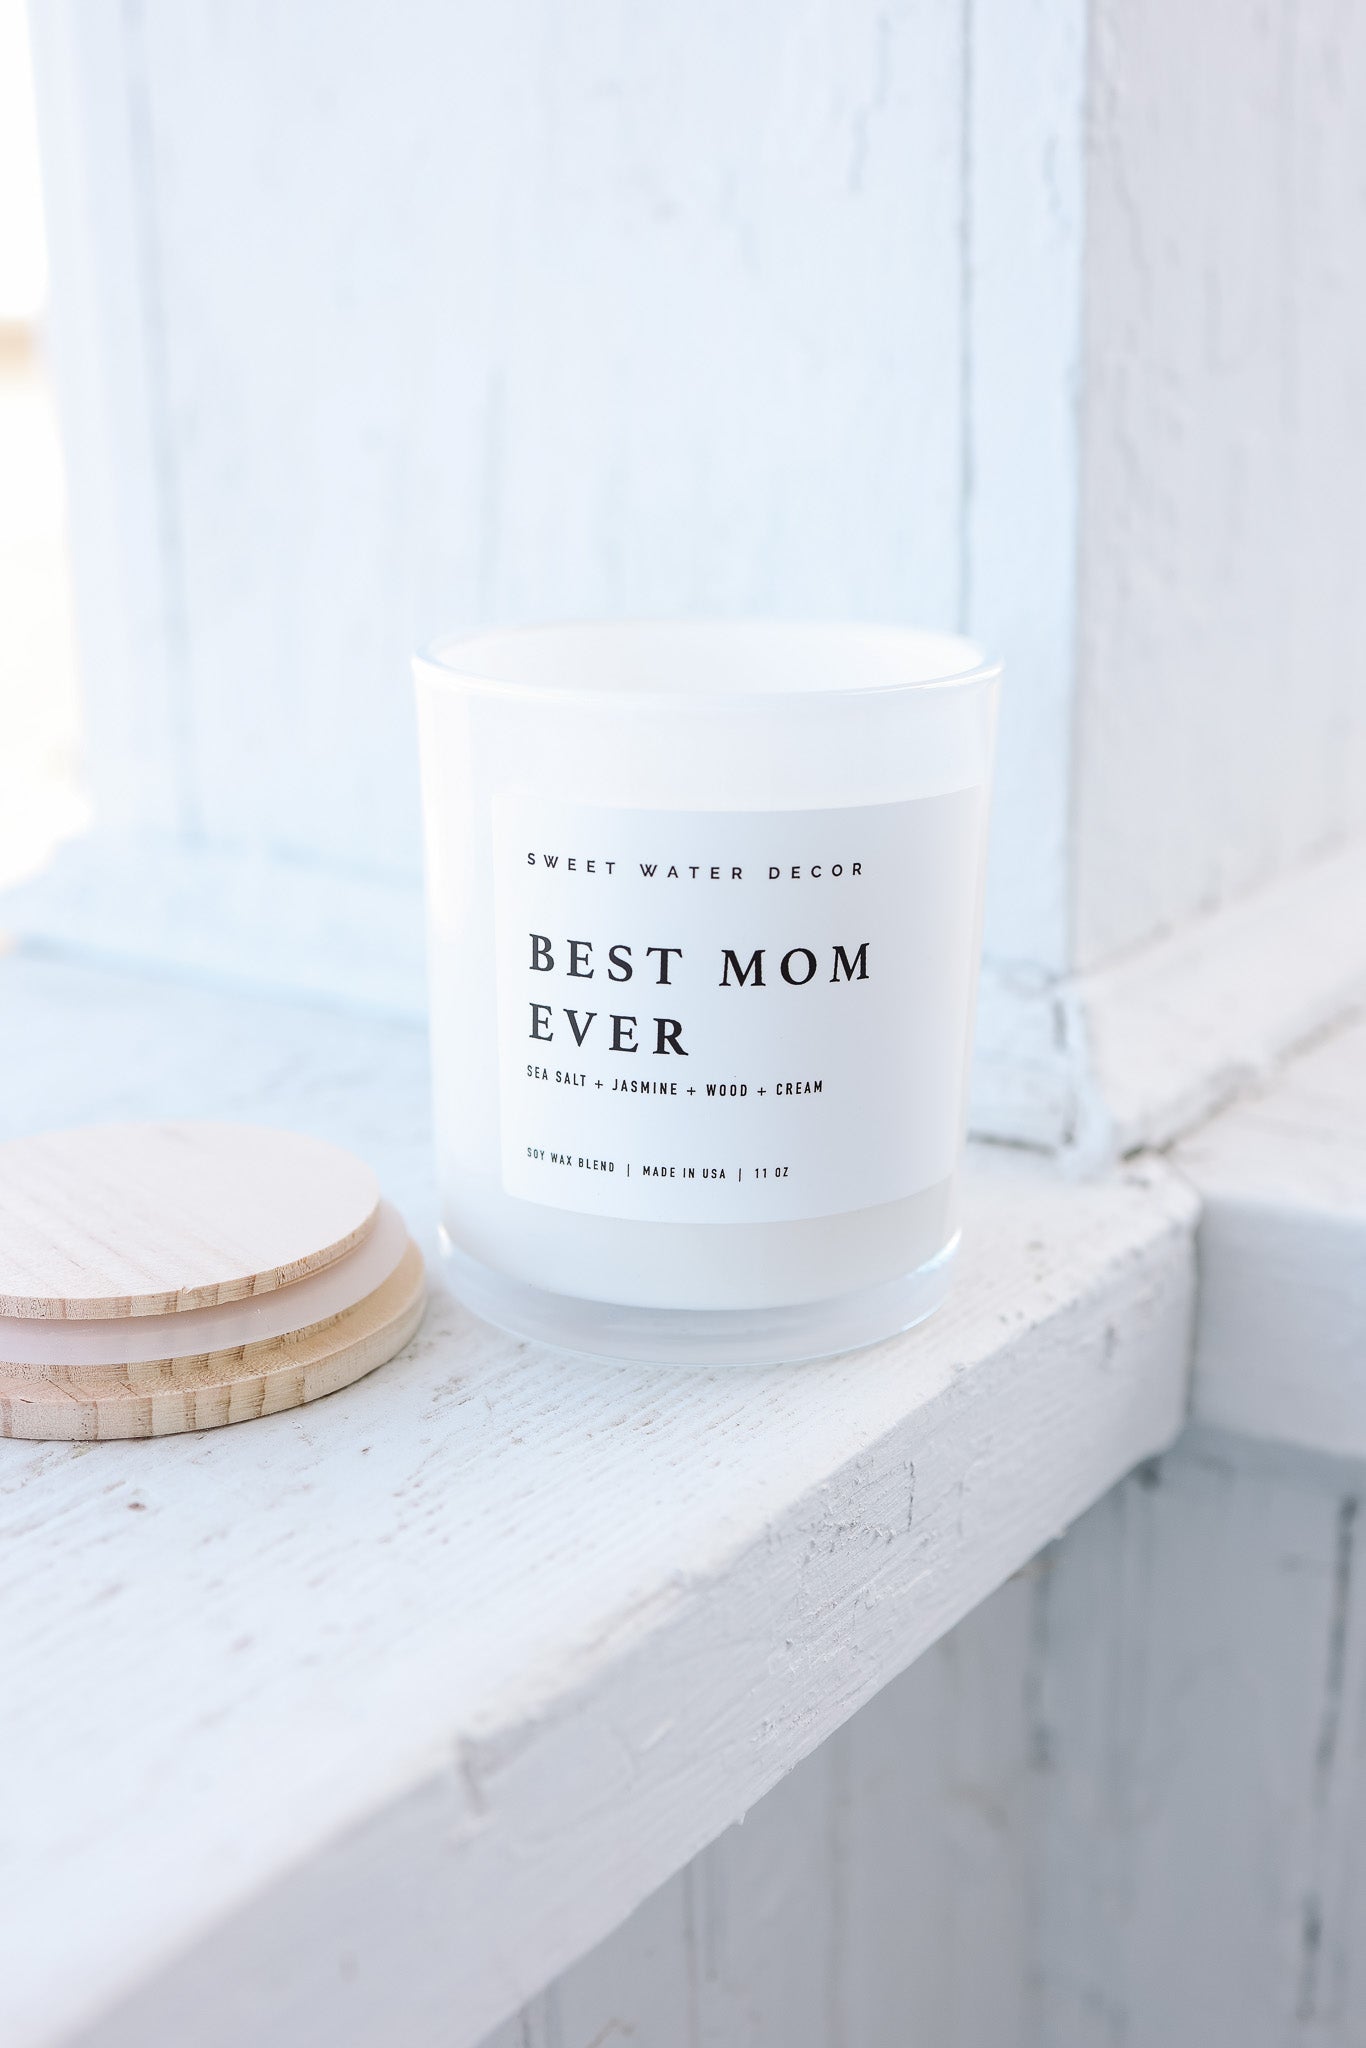 Best Mom Ever! 11 oz Soy Candle